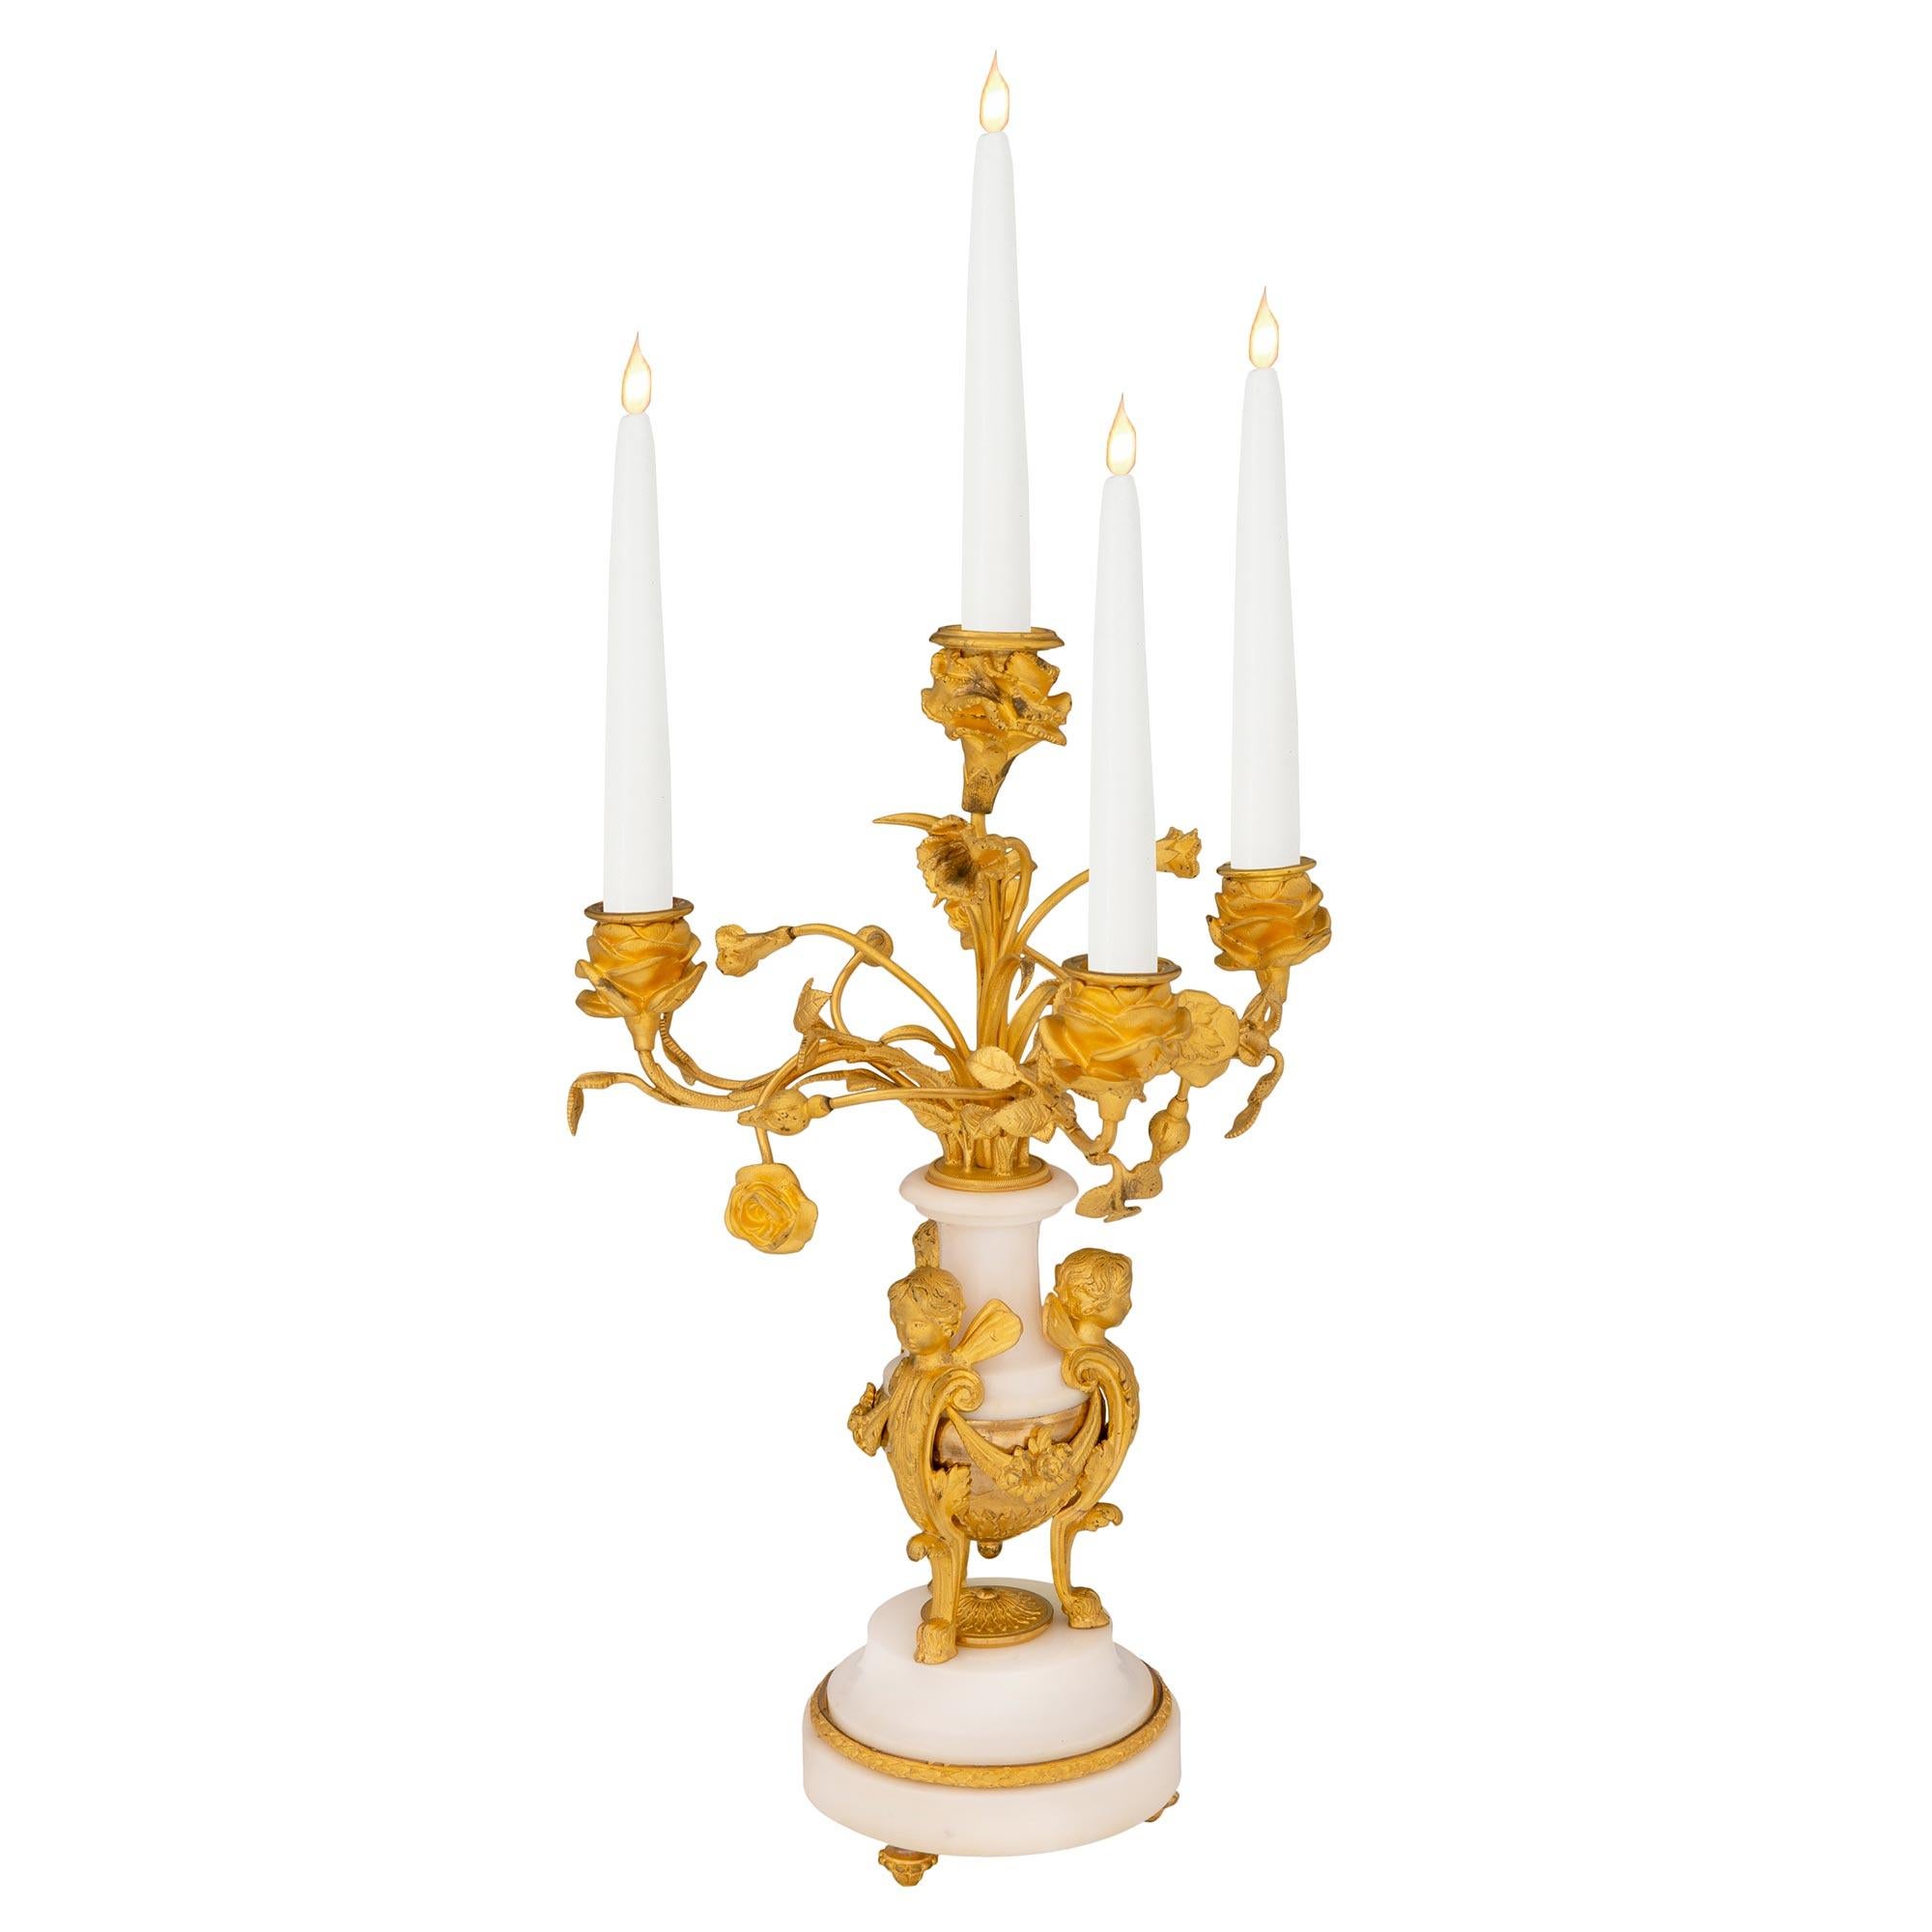 A beautiful and high quality pair of French 19th century Louis XVI st. ormolu and white Carrara marble four arm candelabras. Each candelabra is raised by fine ormolu topie shaped feet below a circular white Carrara marble base decorated with a